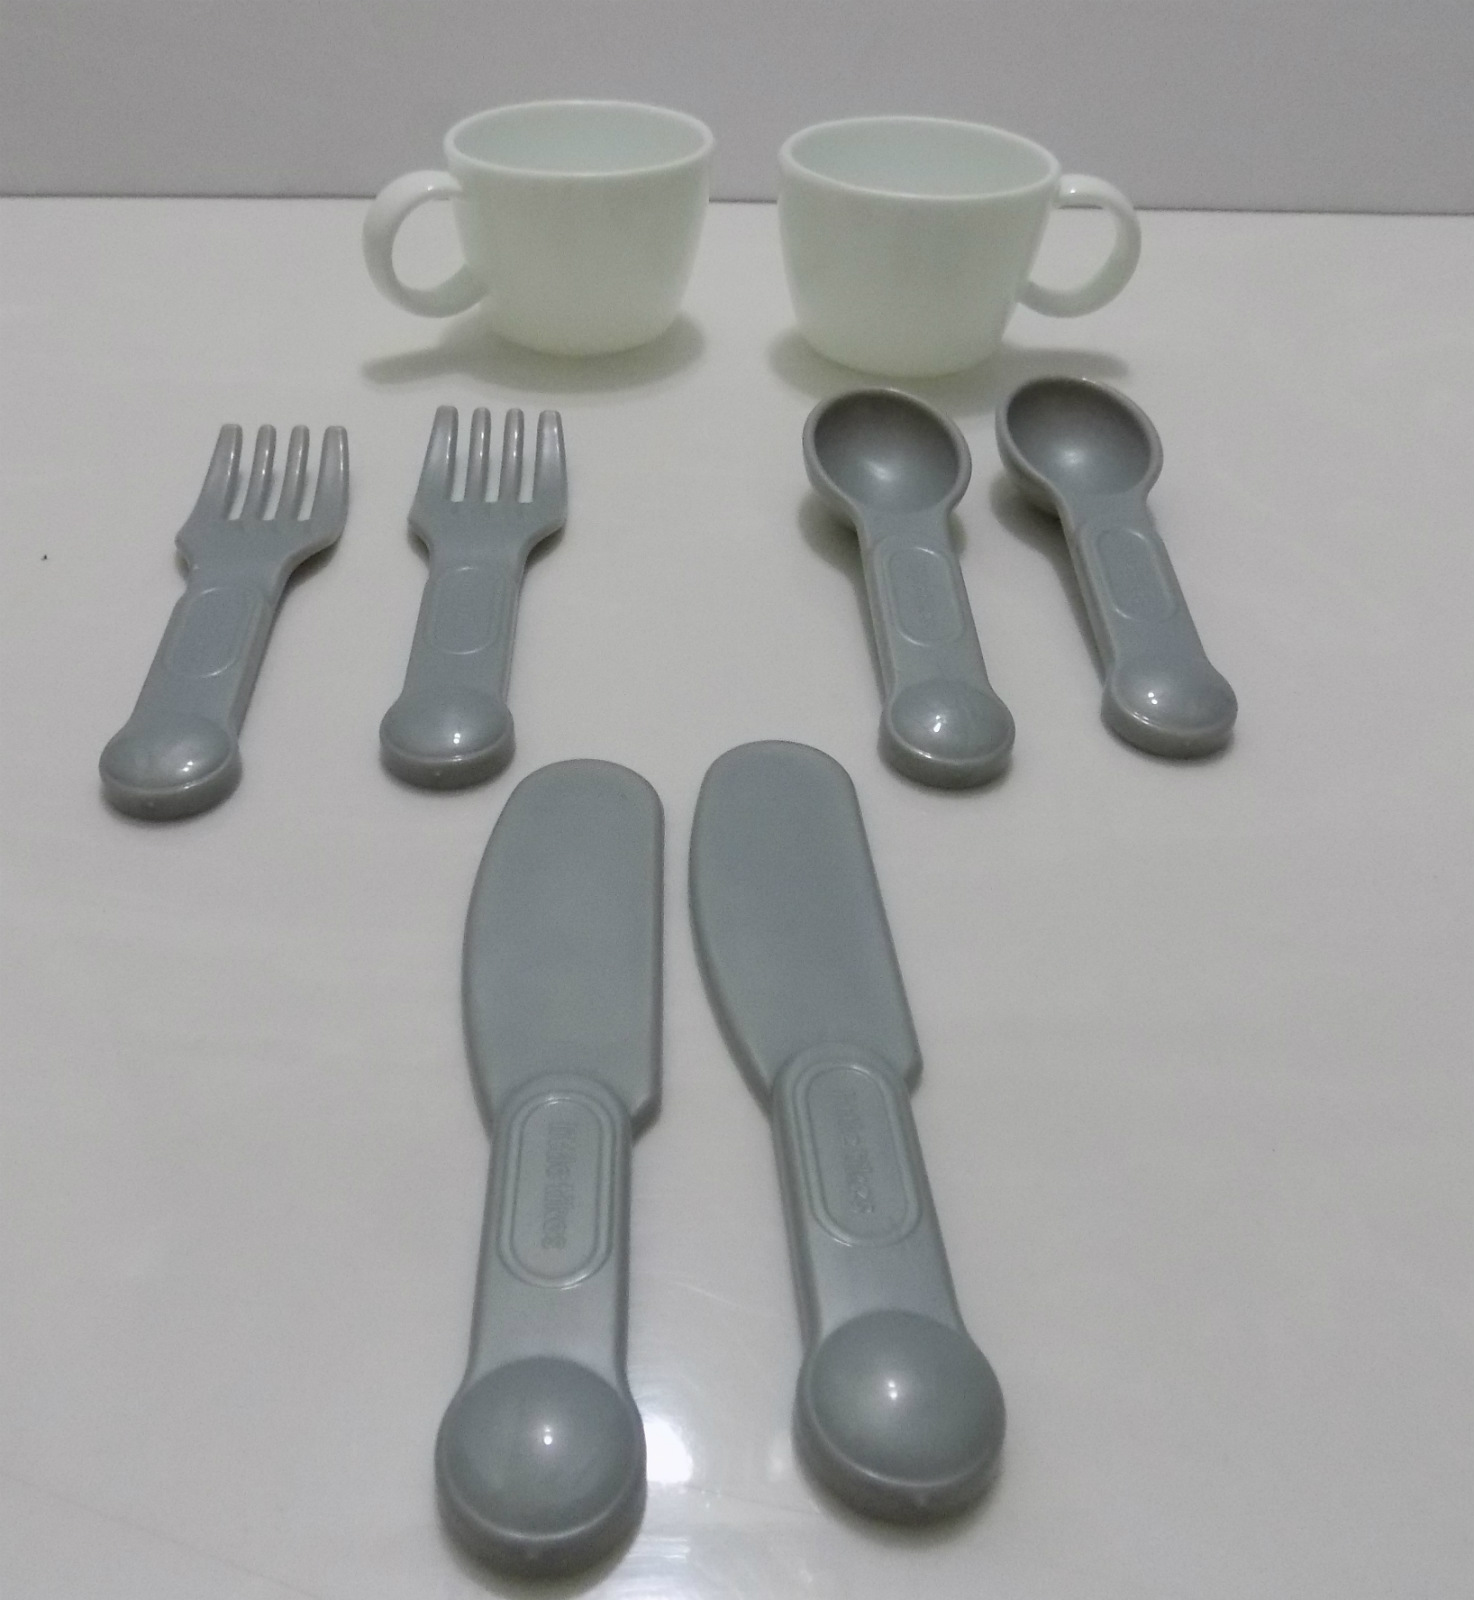 Little Tikes Replacement Utensils Super Chef Kitchen Forks Spoons